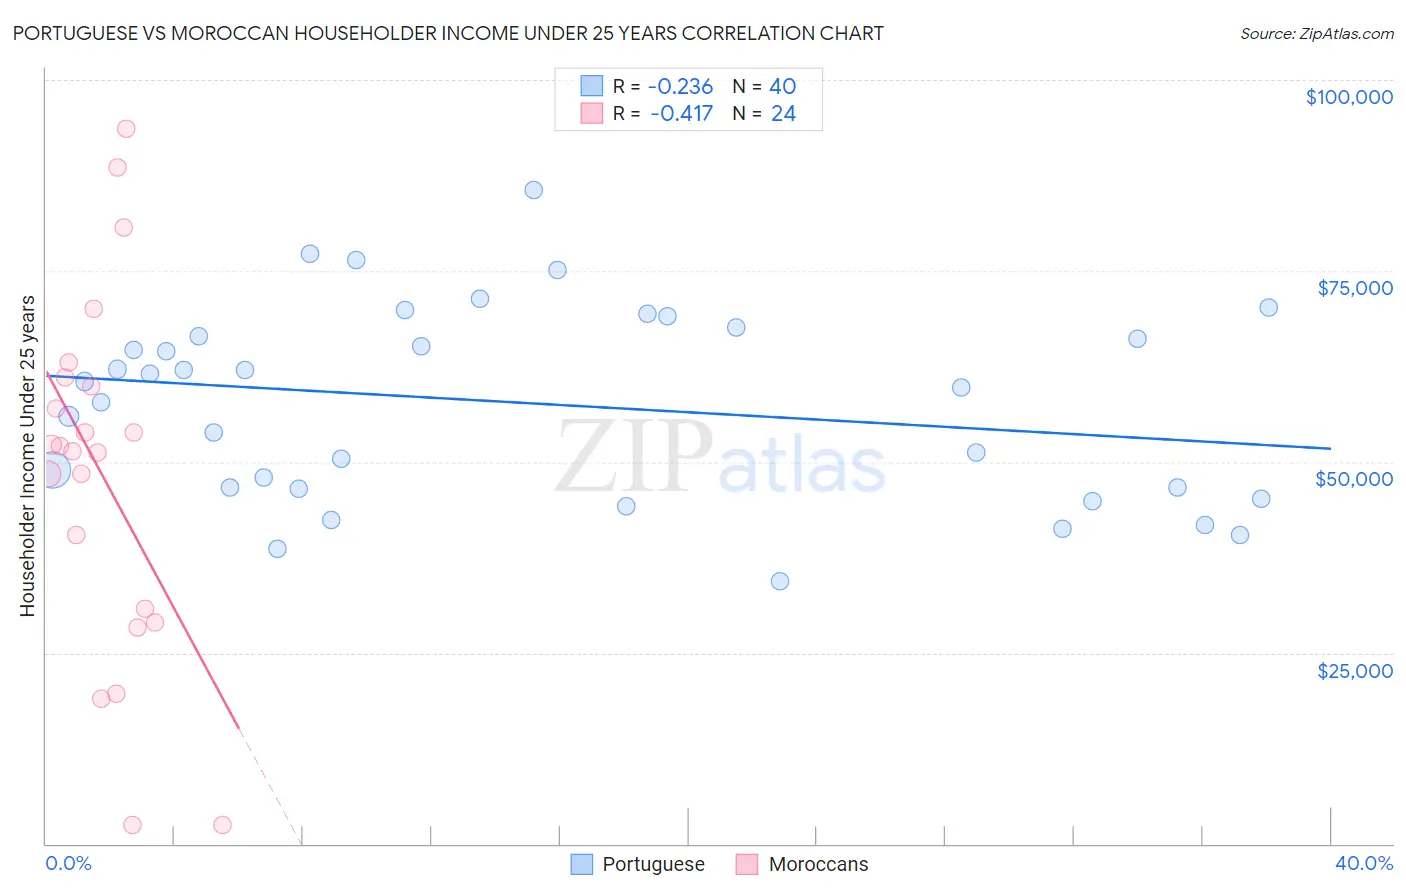 Portuguese vs Moroccan Householder Income Under 25 years